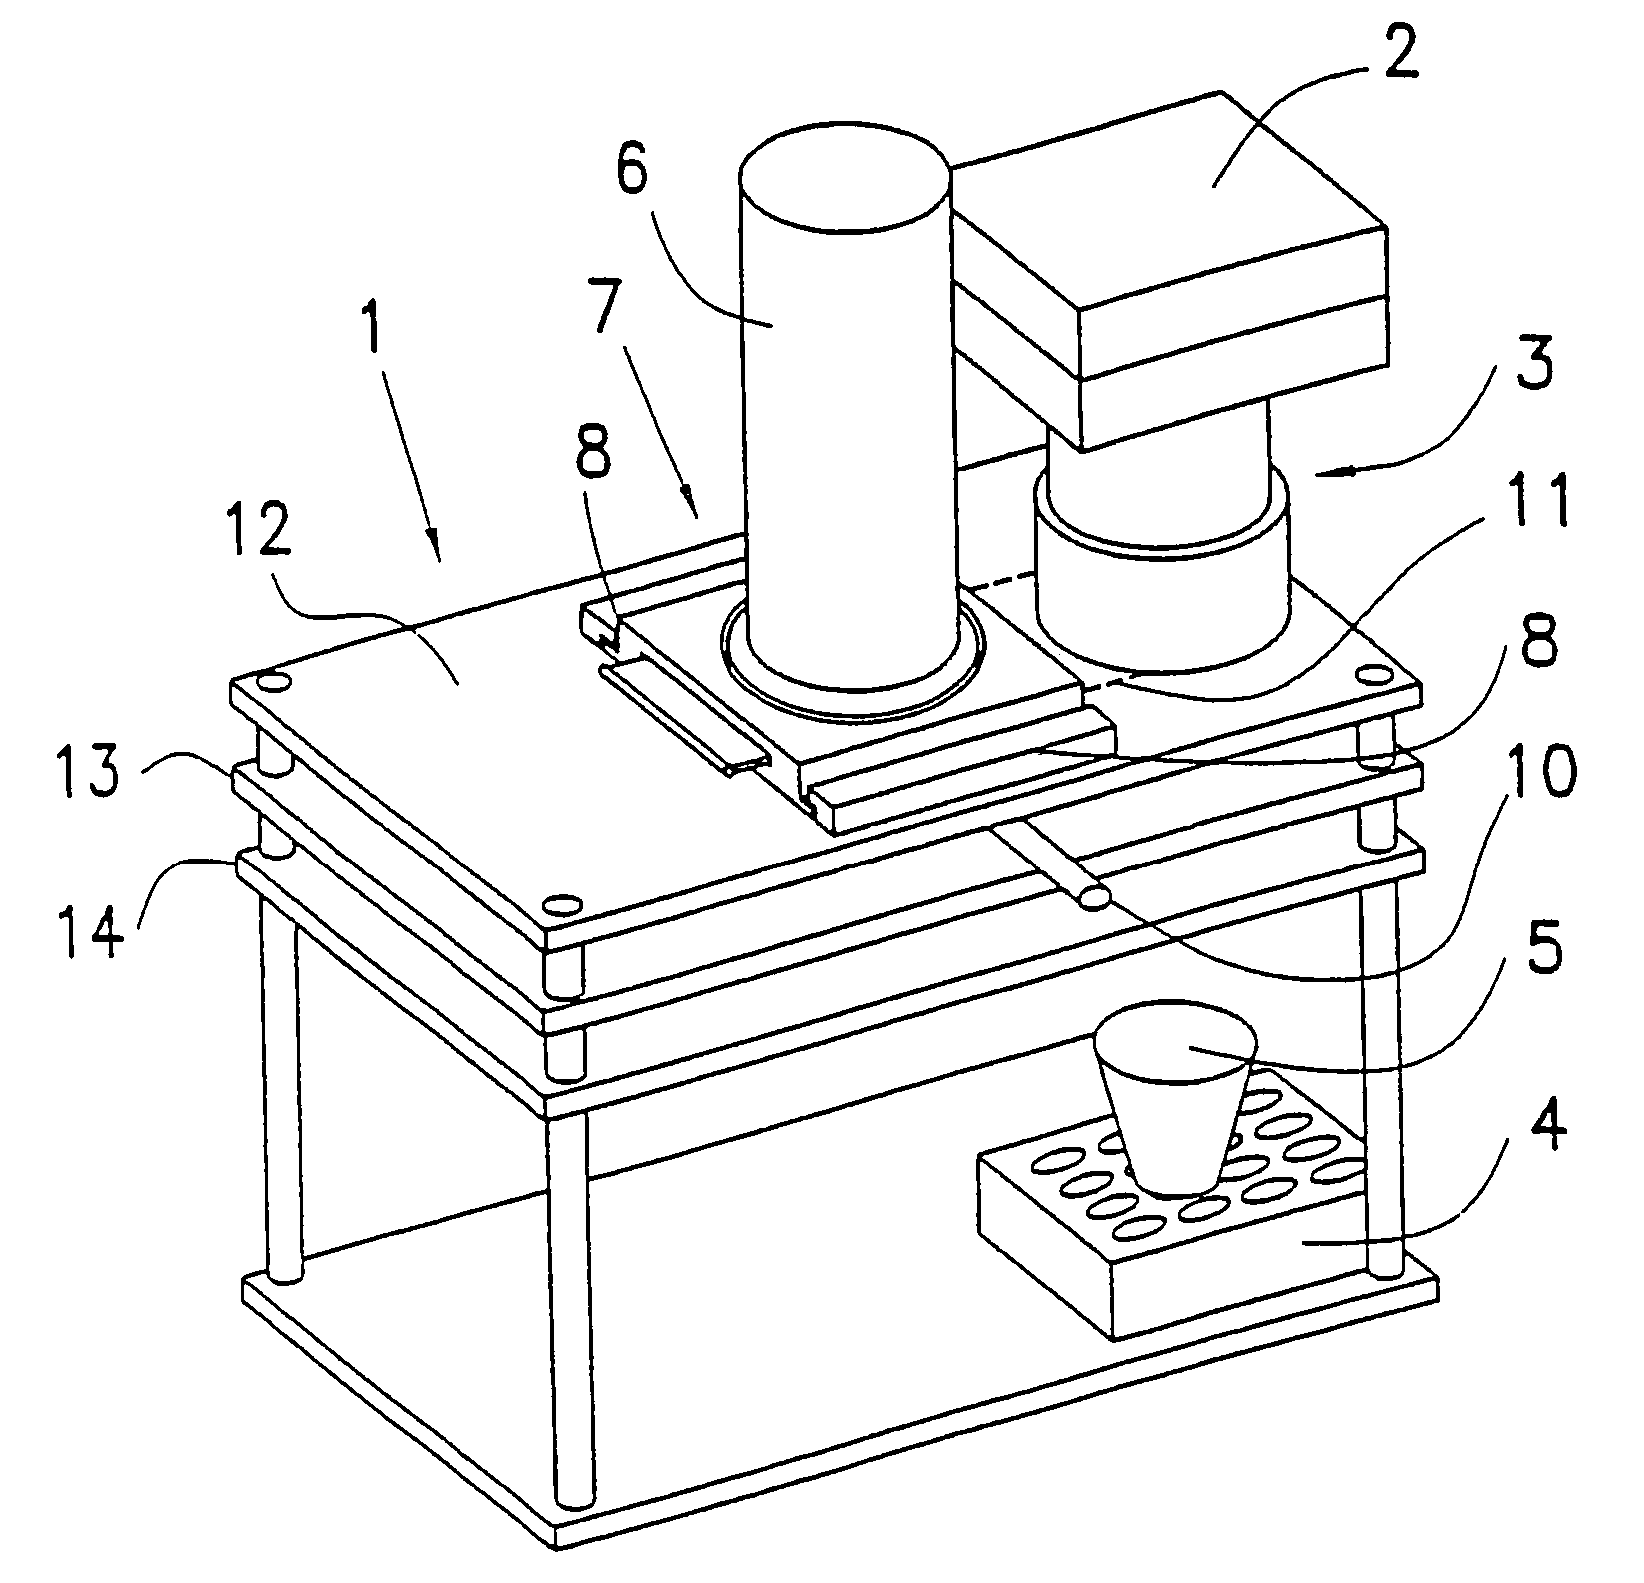 System for transferring individual coffee packages from a container to the extraction chamber of a machine for making espresso coffee